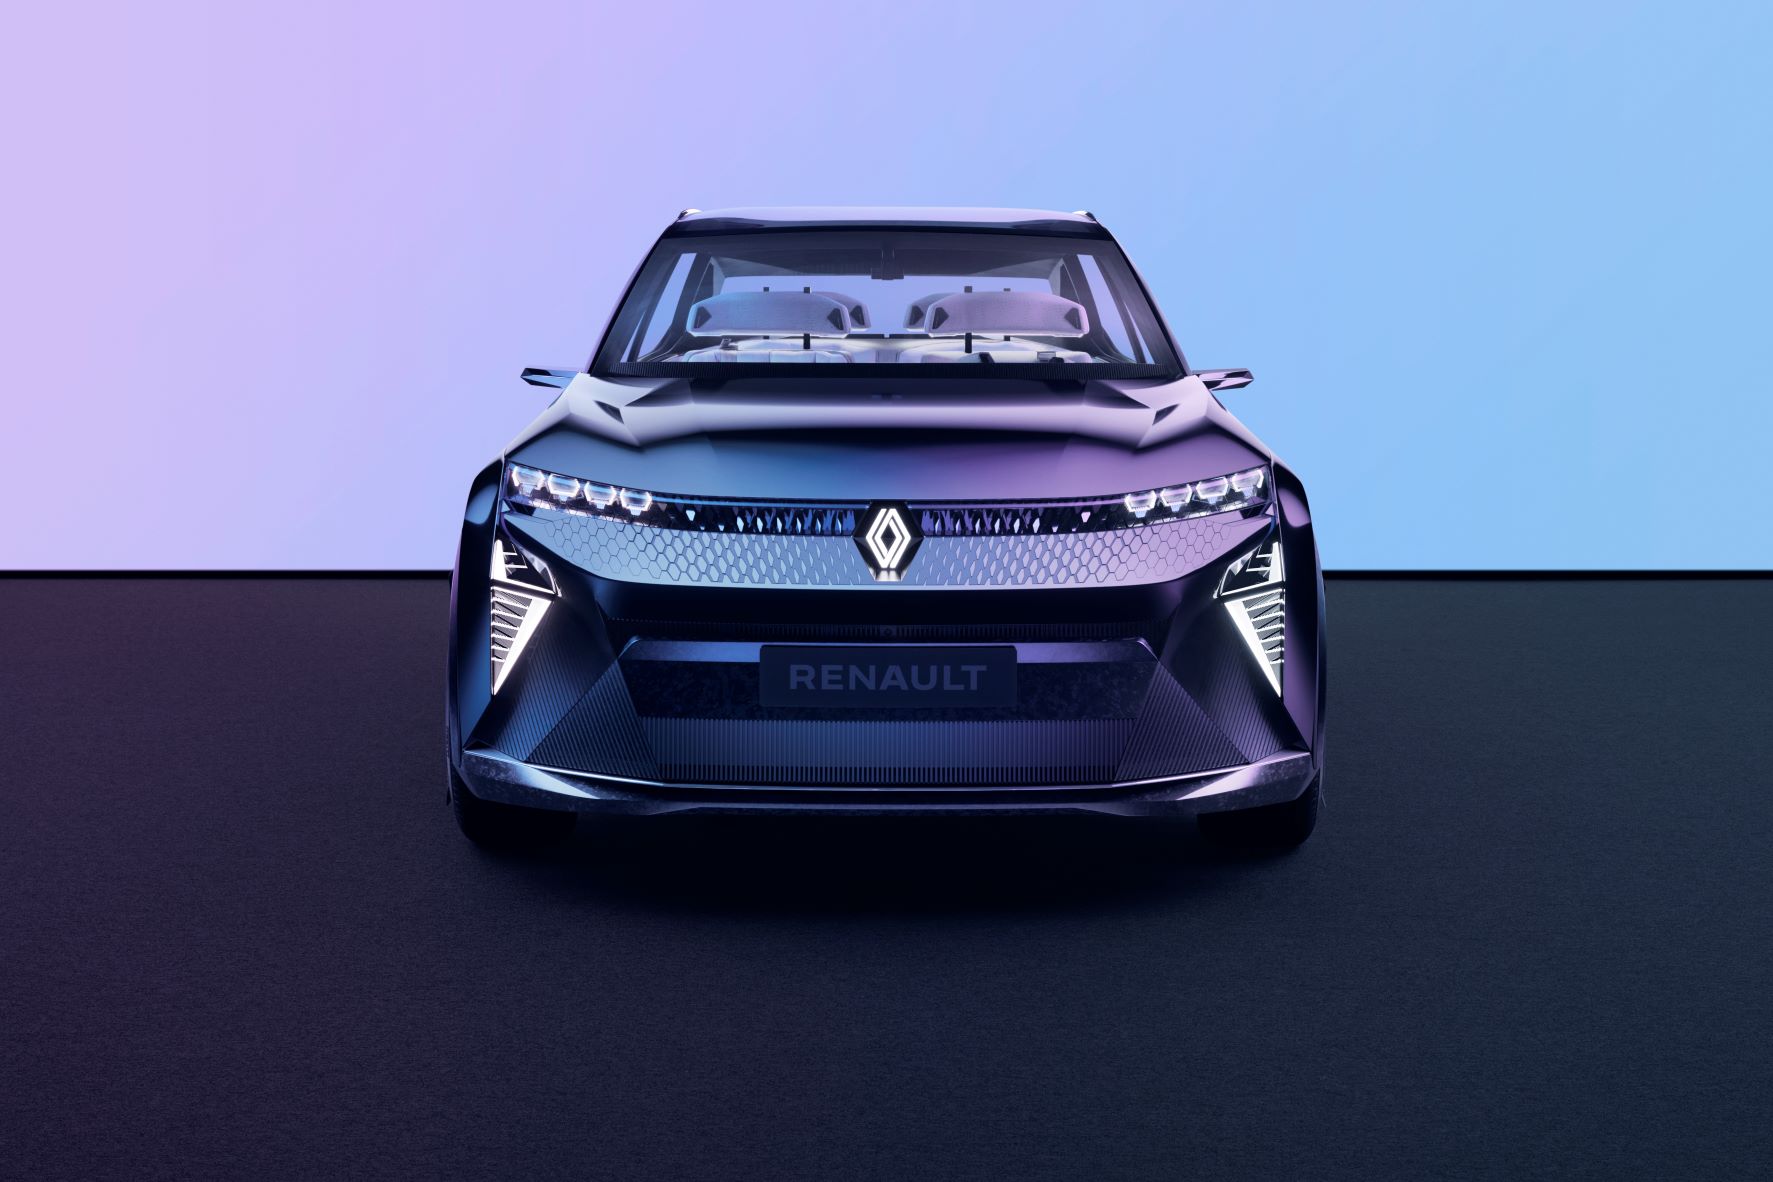 Front view of the new Renault Scenic Vision concept